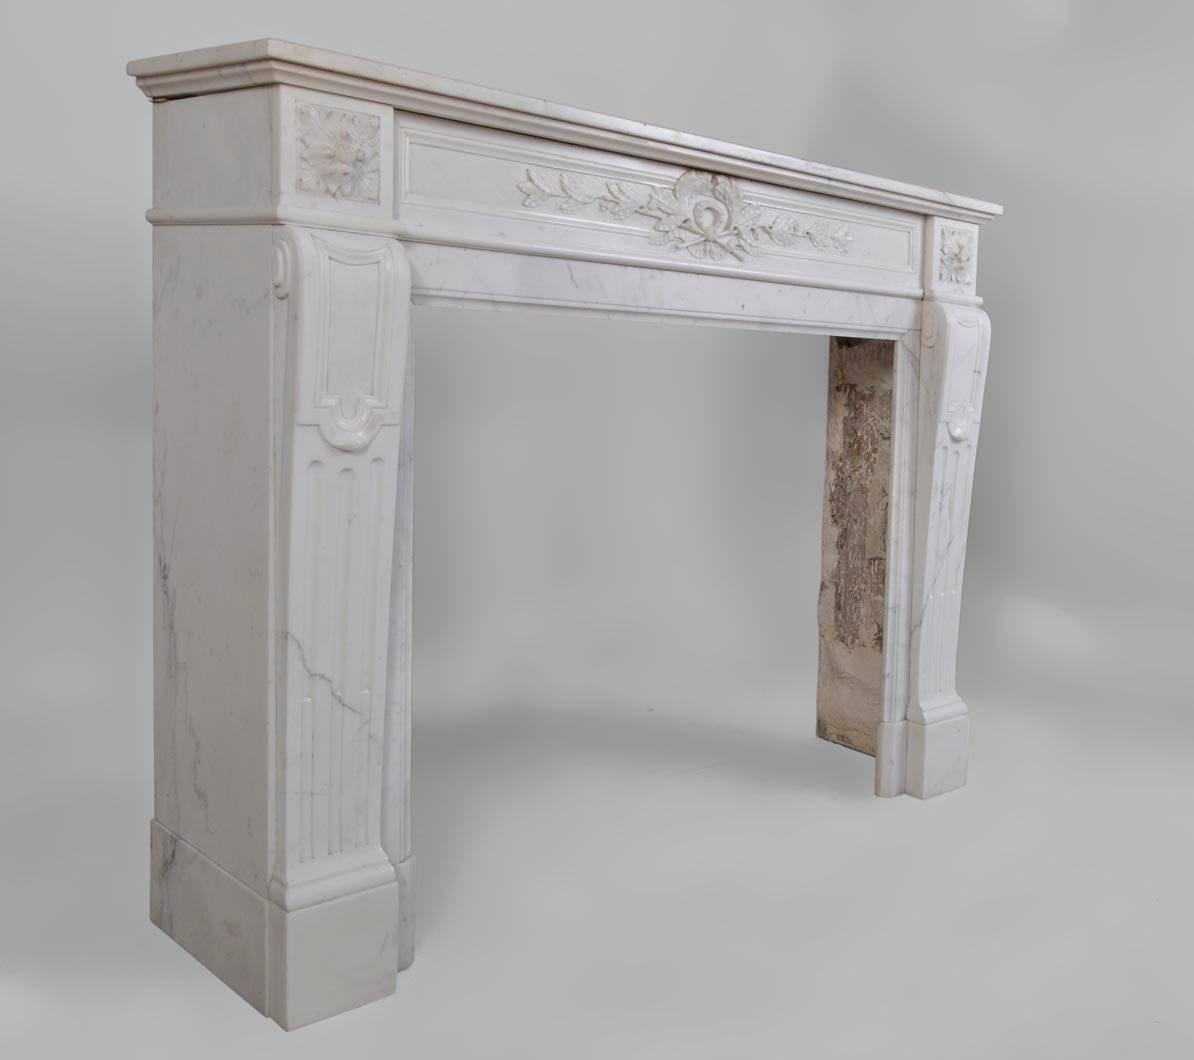 Carved 19th Century Louis XVI Style Fireplace in Carrara Marble